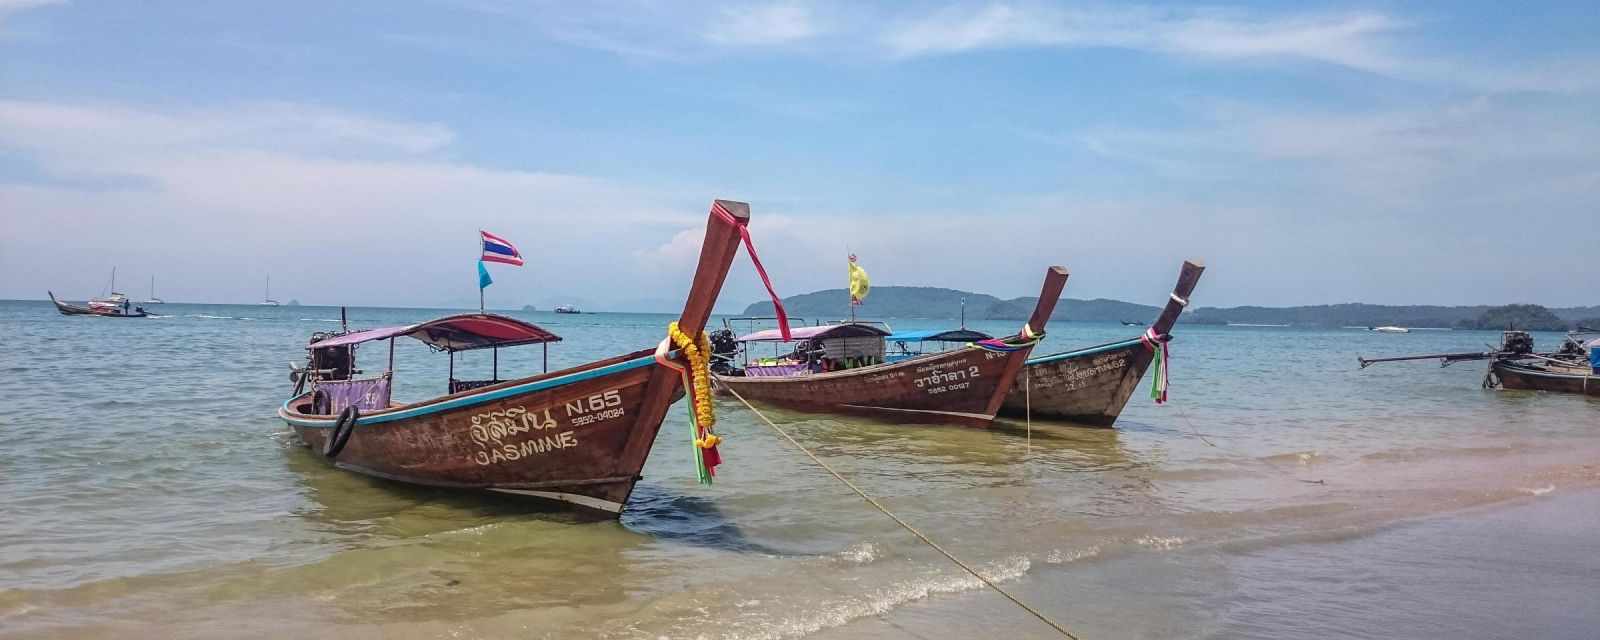 Railay Beach in Krabi - 5 Things to Do and Tips